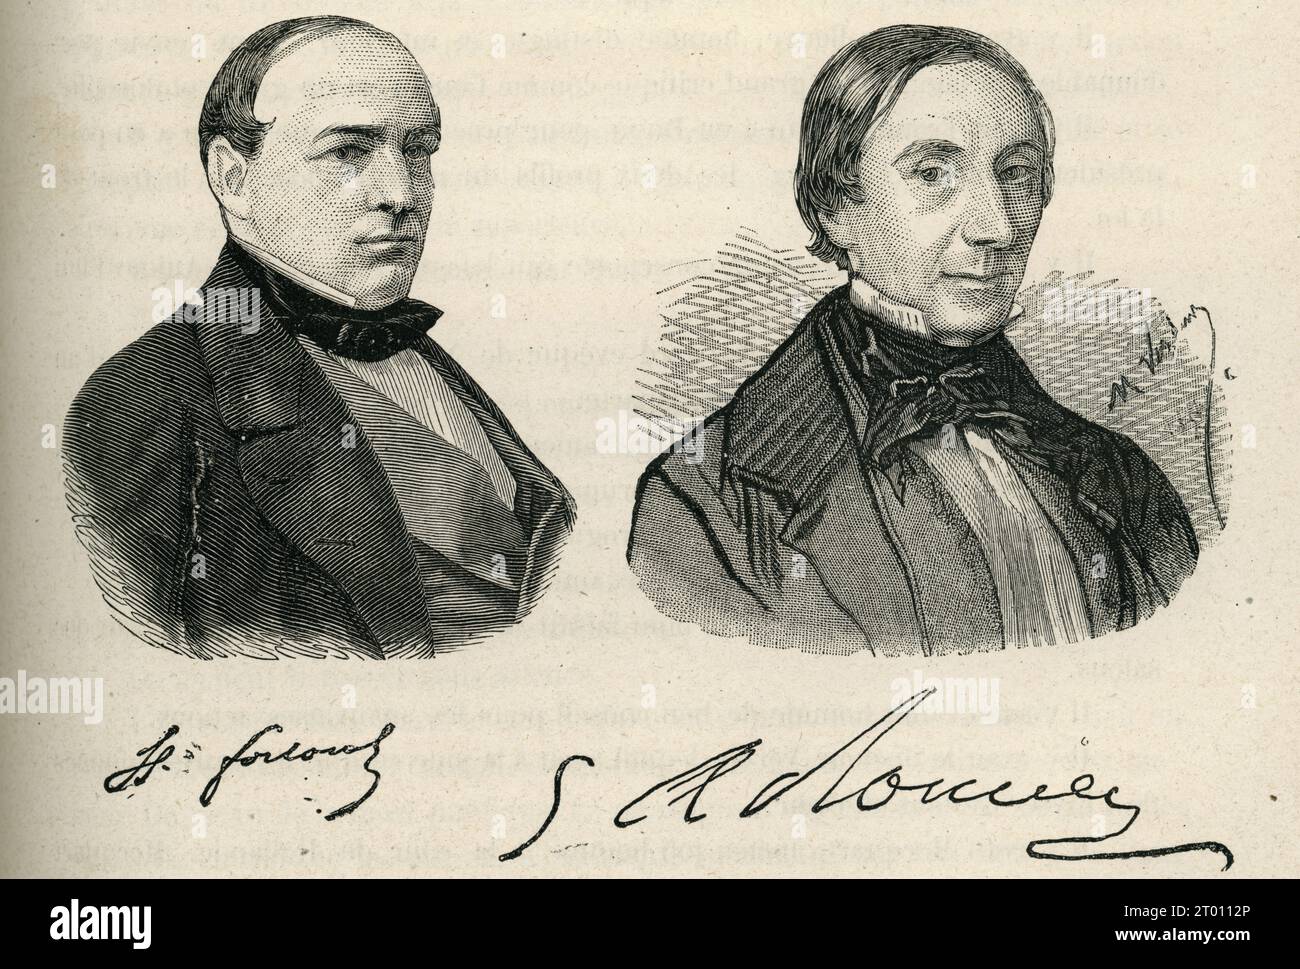 Portrait of Hippolyte Fortoul and Auguste Romieu.  Illustration from 'Histoire d'un crime' ('The History of a Crime', written in 1852) and part of a set of engravings published in Victor Hugo's 'Oeuvres'. Book published in French by Eugène Hugues in 1879. Stock Photo